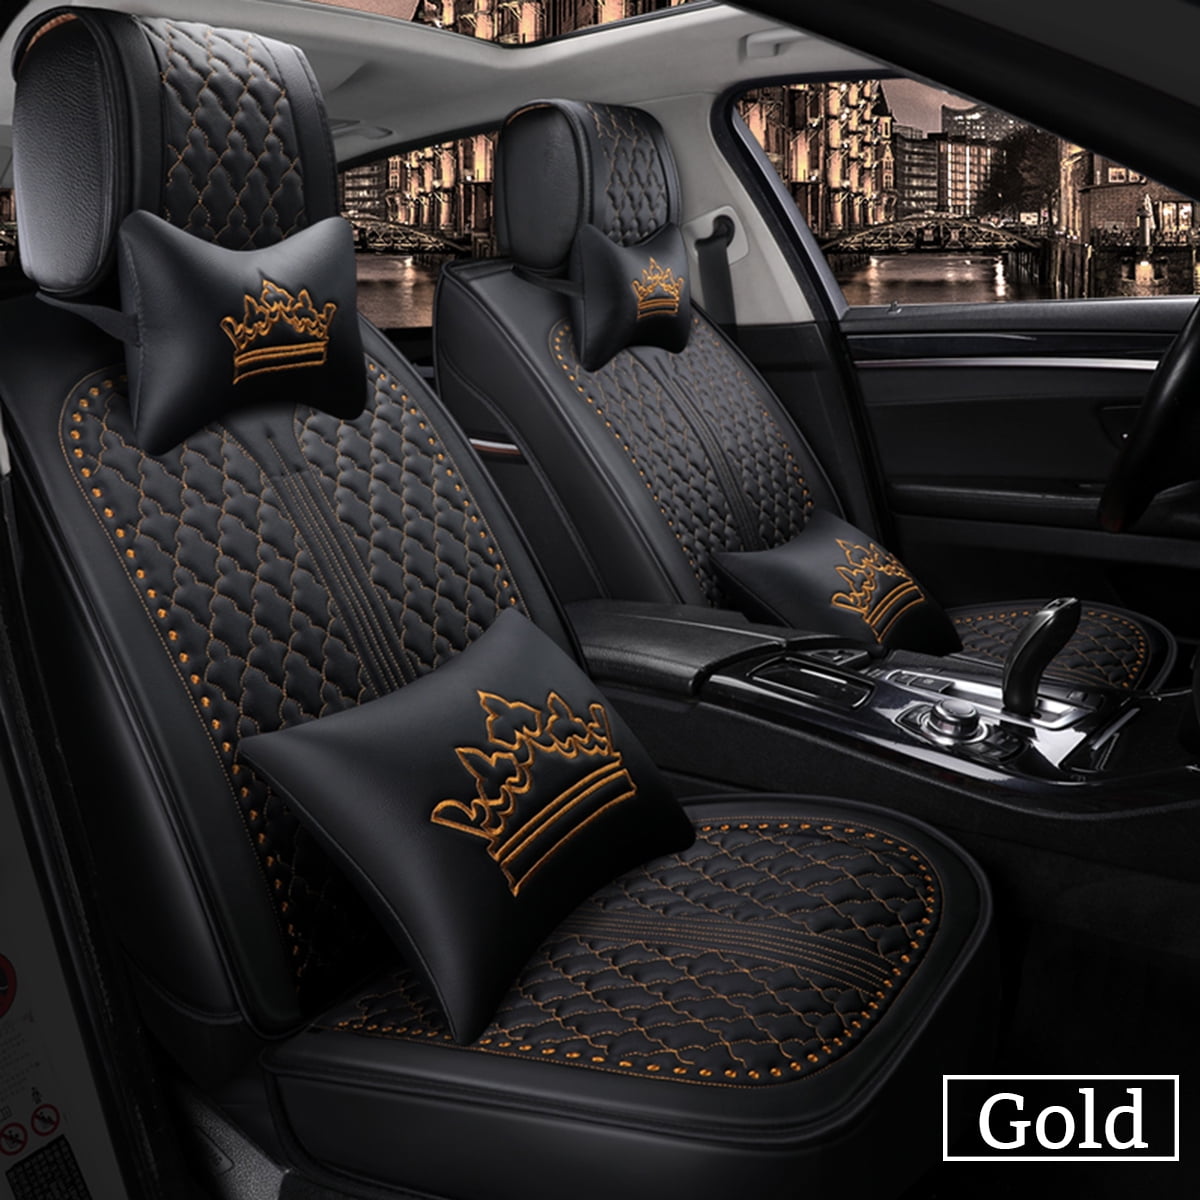 Leader Accessories Auto 2 Leather Black Seat Covers Universal Fit Cars SUV Trucks Front Seats Low Back with Airbag 